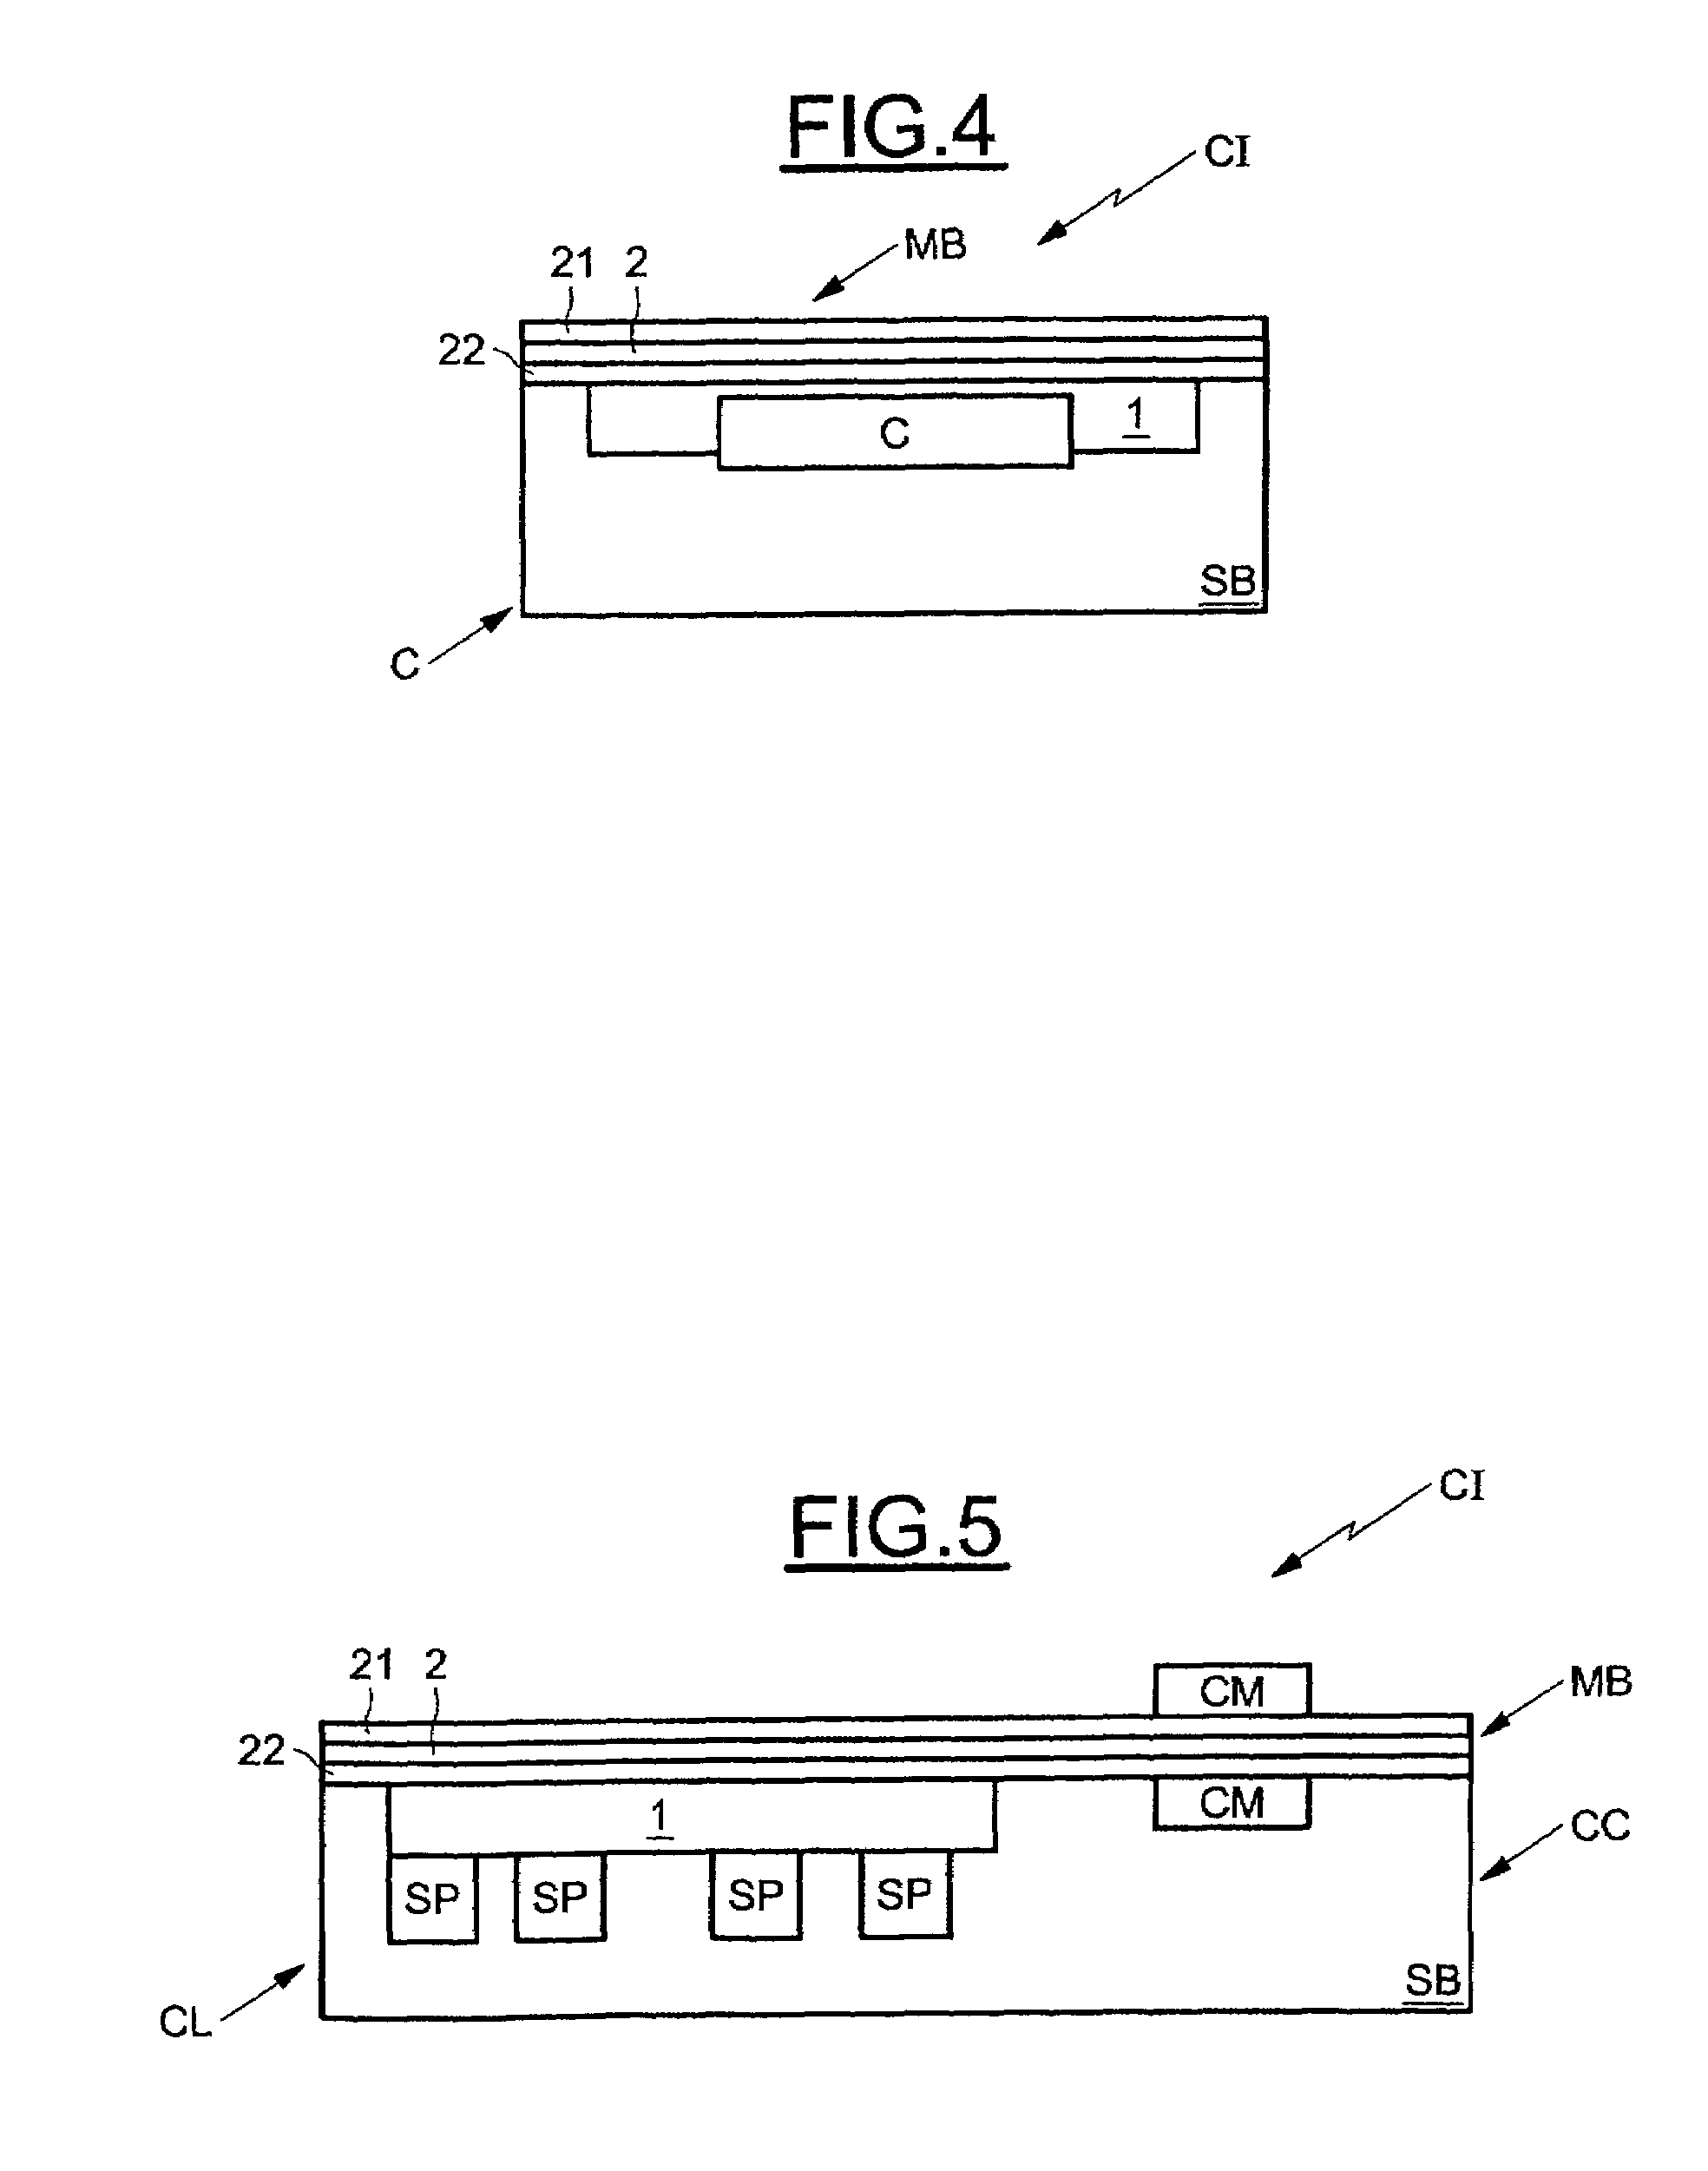 Process for obtaining a thin, insulating, soft magnetic film of high magnetization